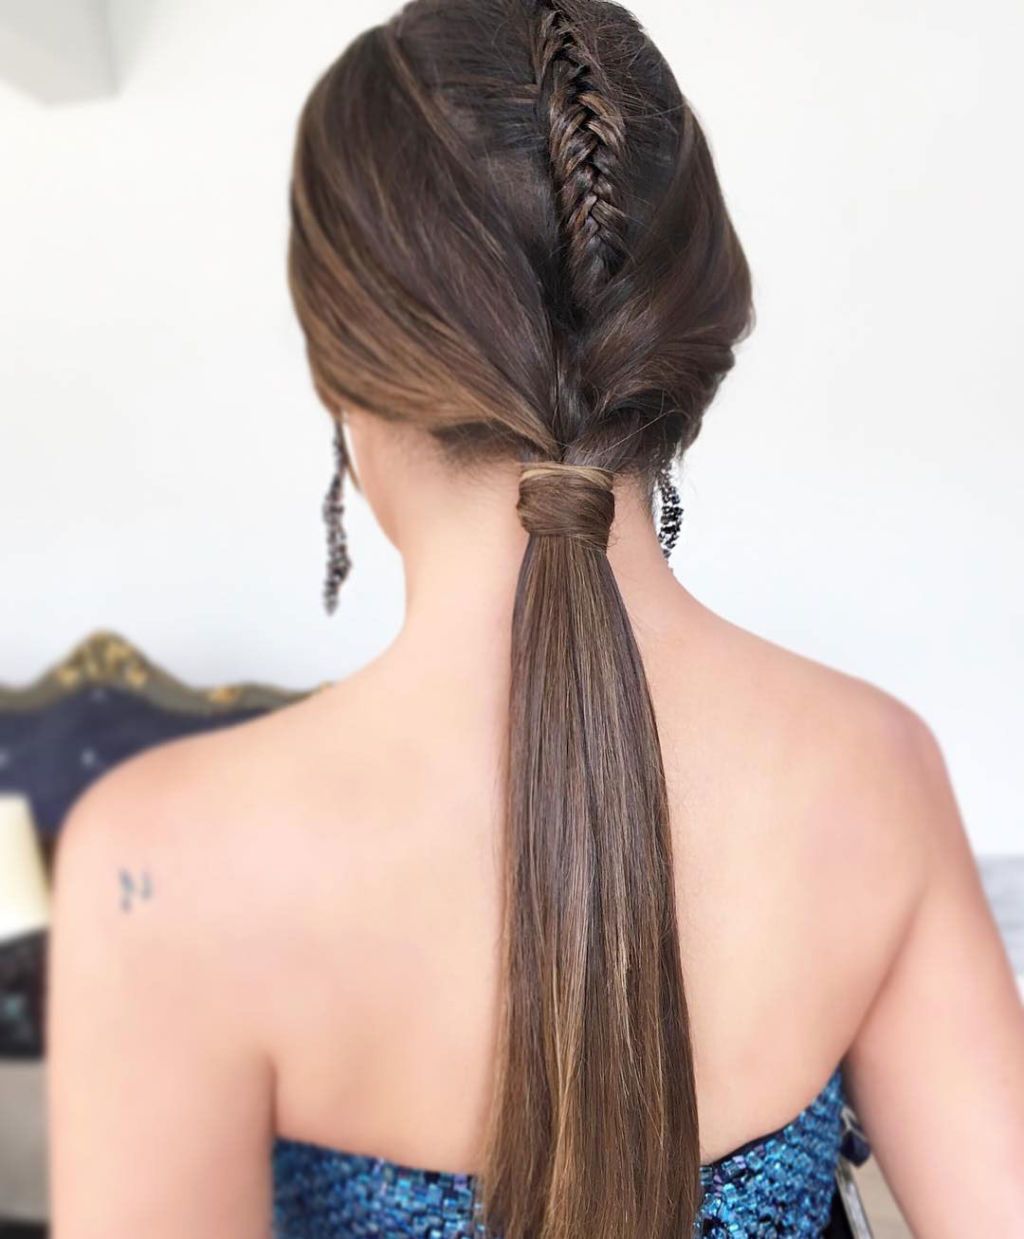 High Ponytail Hairstyle For Summer Wedding by emmahairstyle on DeviantArt